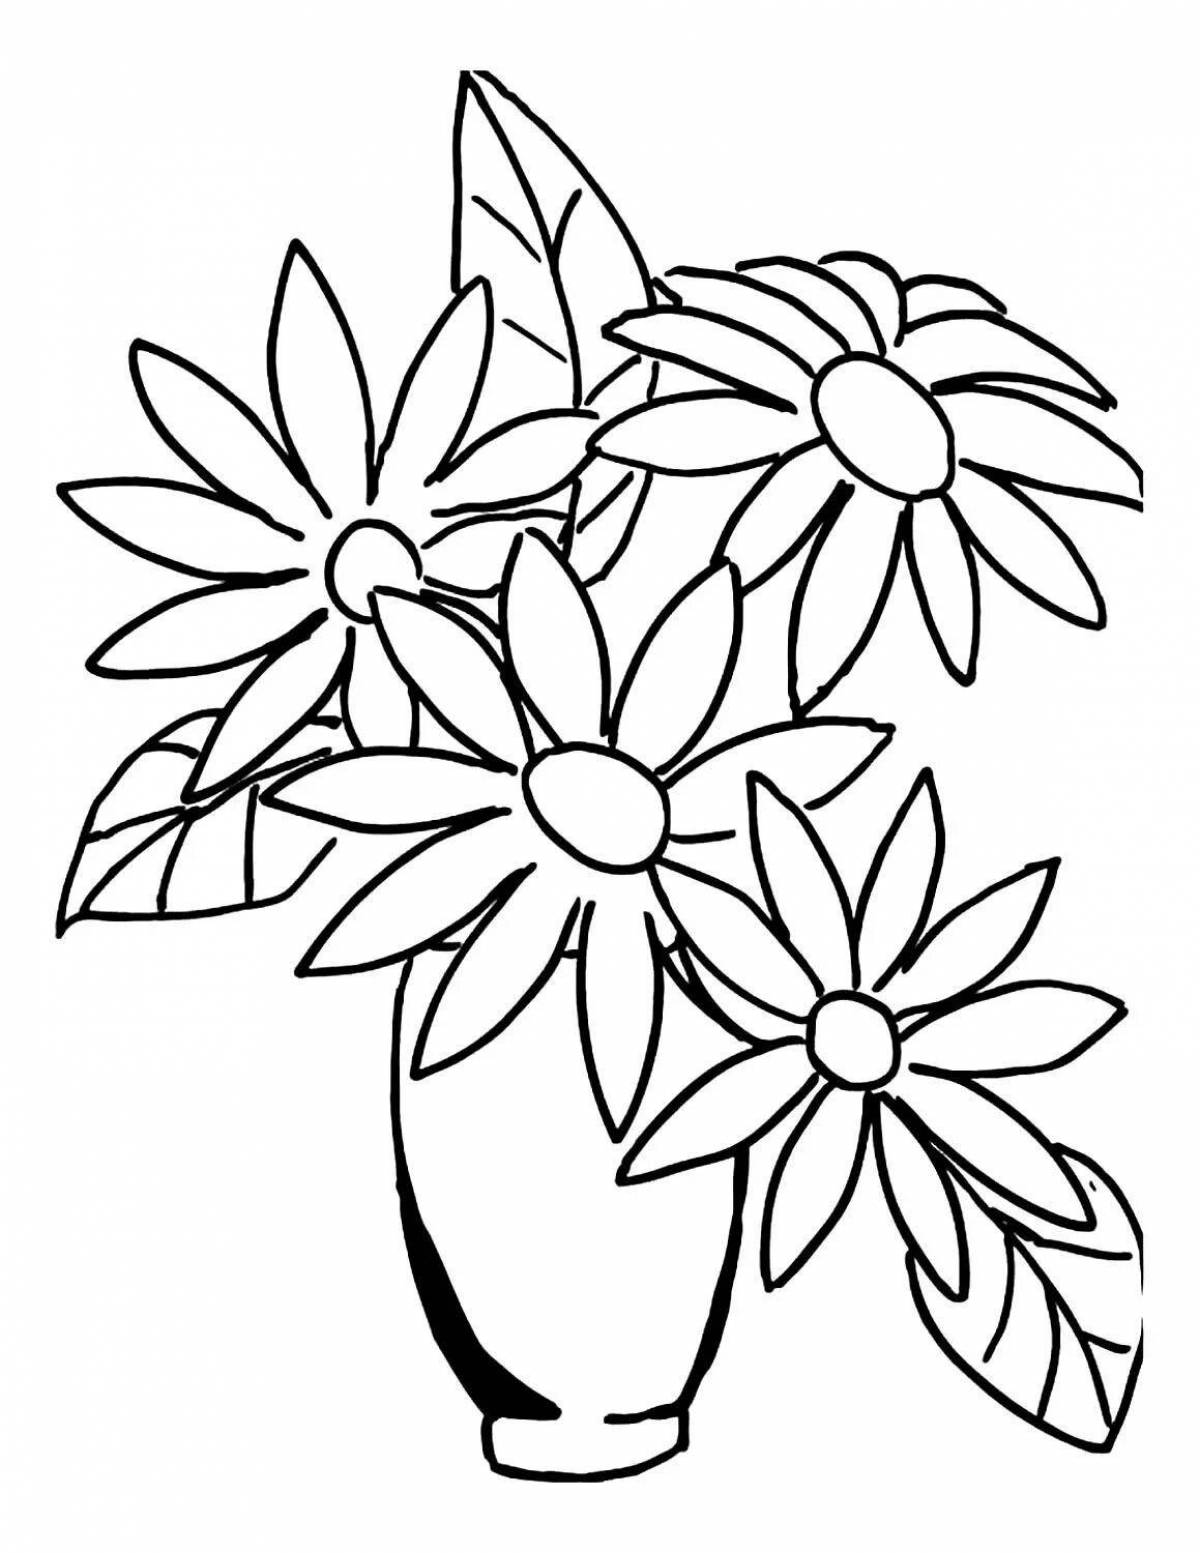 Colorful bouquet in a vase coloring book